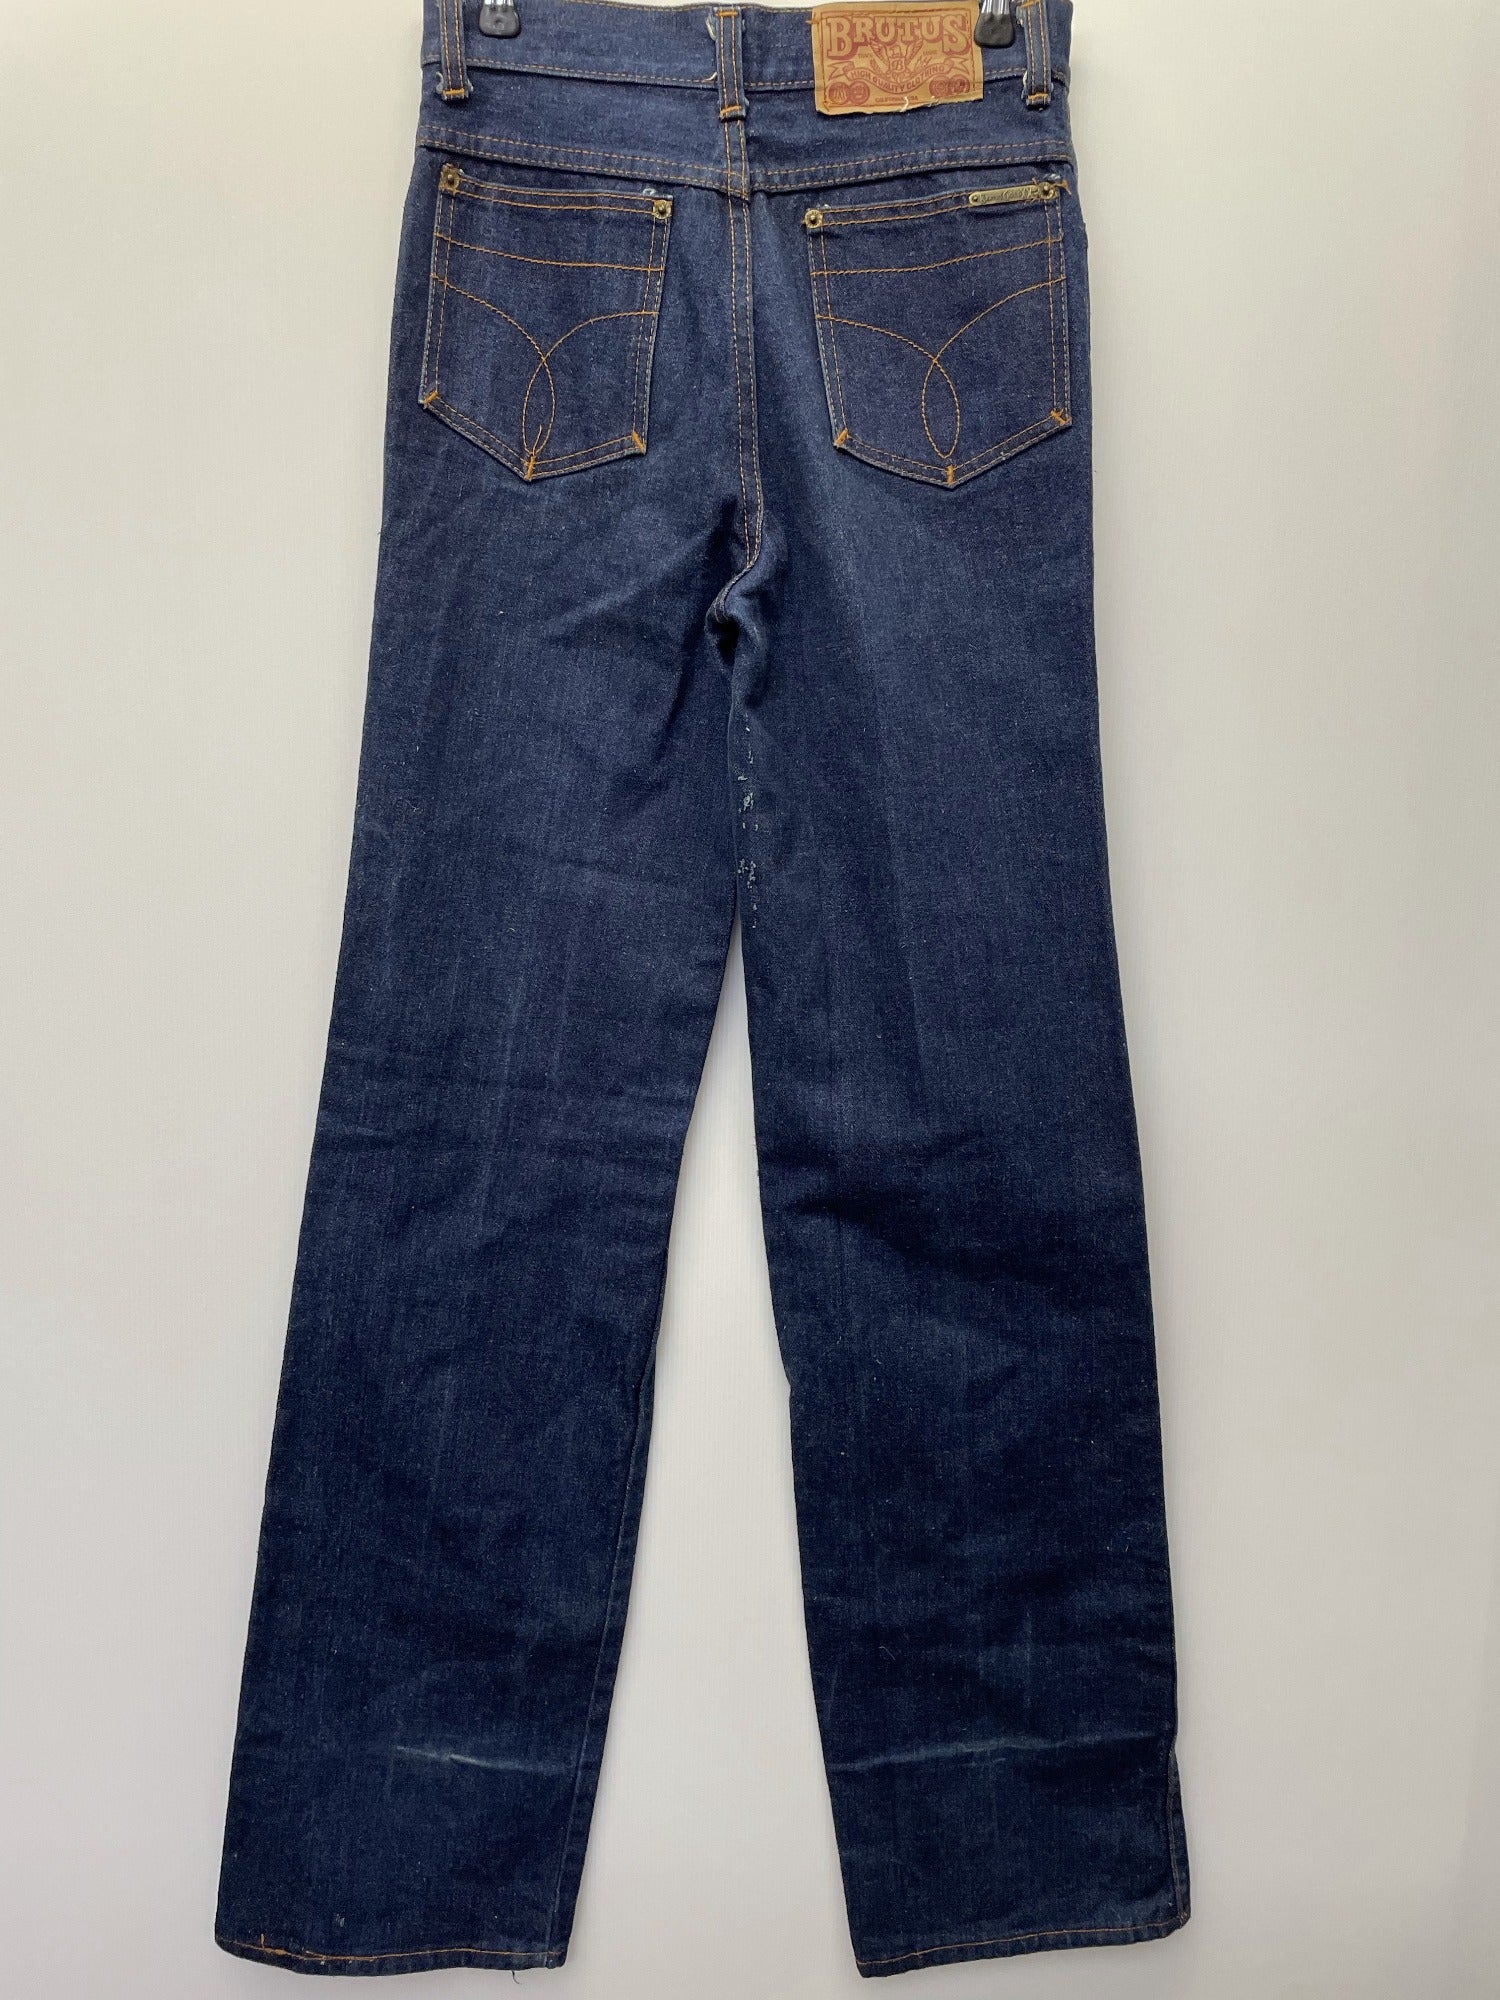 1970s Brutus Flared Jeans - Size W28, L35 - Mens Vintage Clothing ...